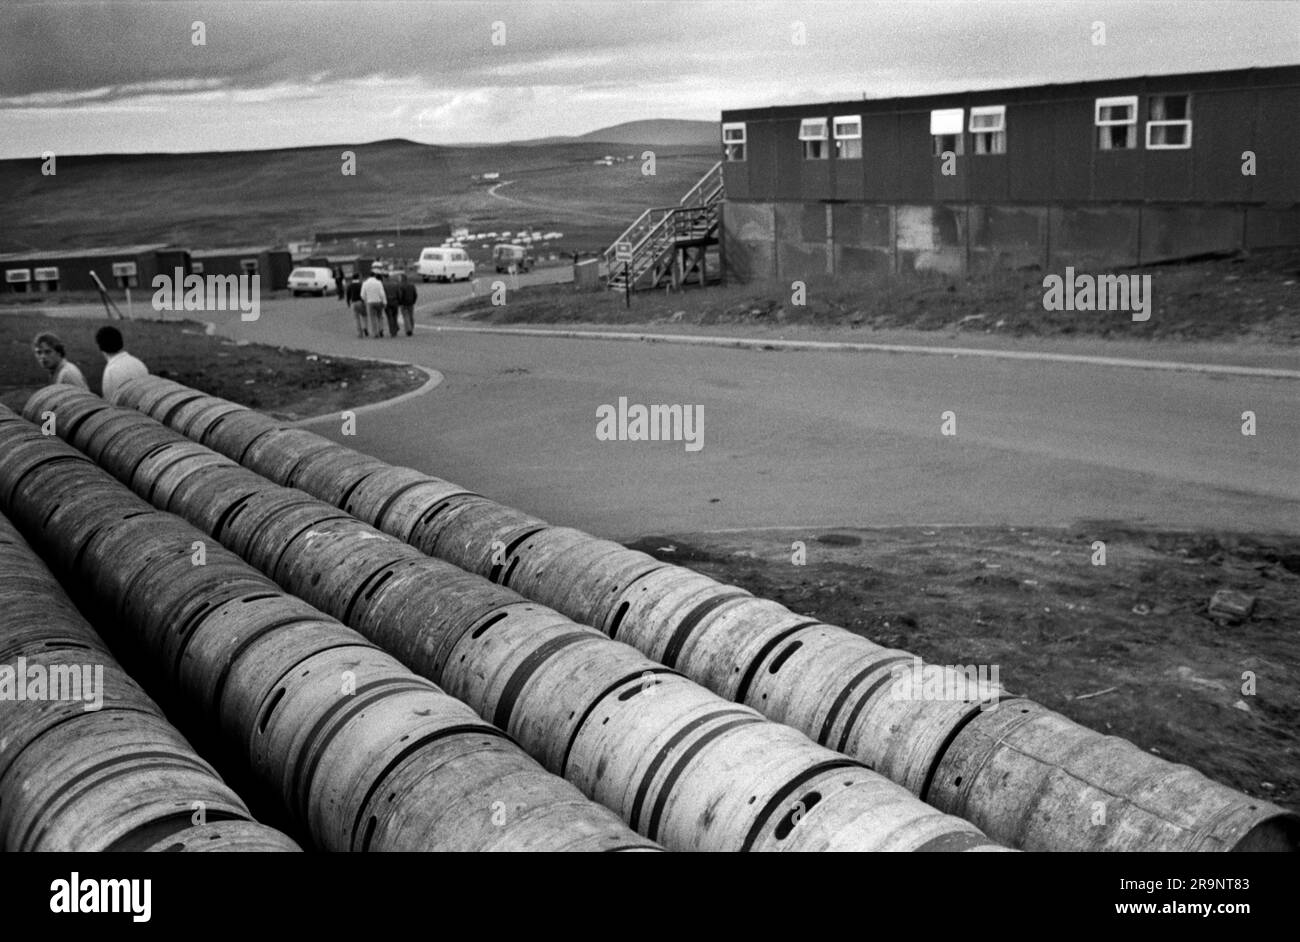 North Sea oil at Sullom Voe Terminal under construction. Beer barrels outside a bar at a construction workers housing site. Sullom Voe, Shetlands Mainland, Shetland Islands, Scotland circa 1979. 1970s HOMER SYKES Stock Photo